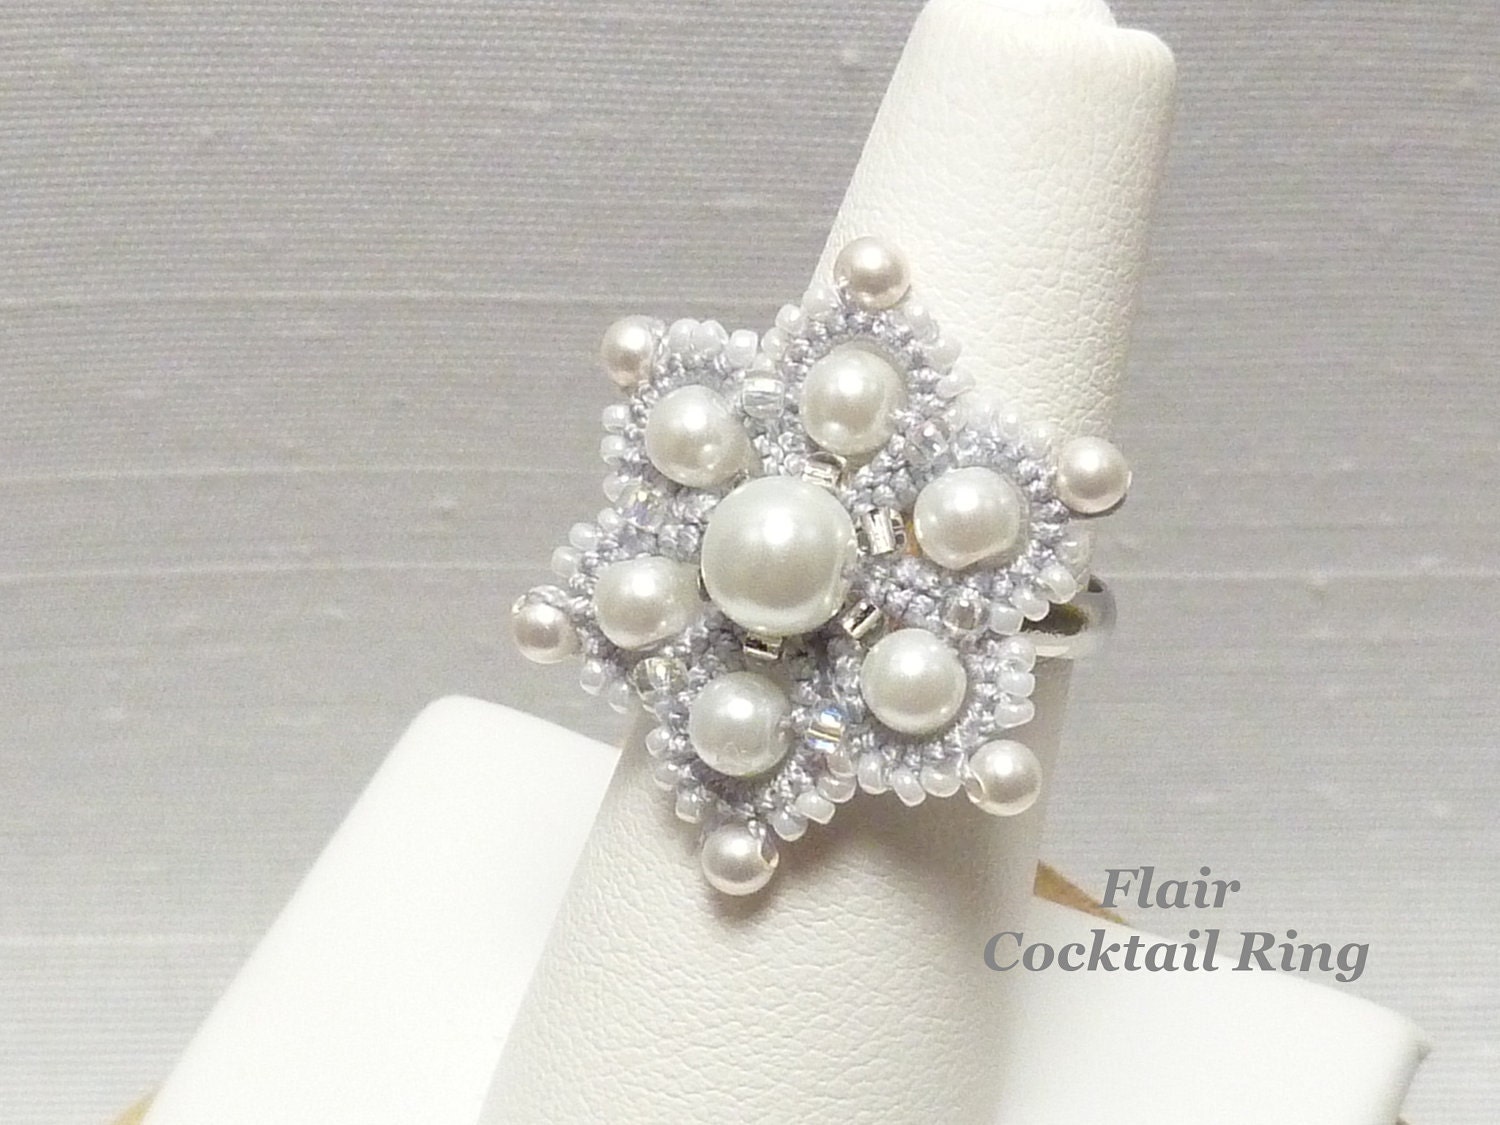 Lace Cocktail Ring Tatted silver Flower with Swarovski pearls